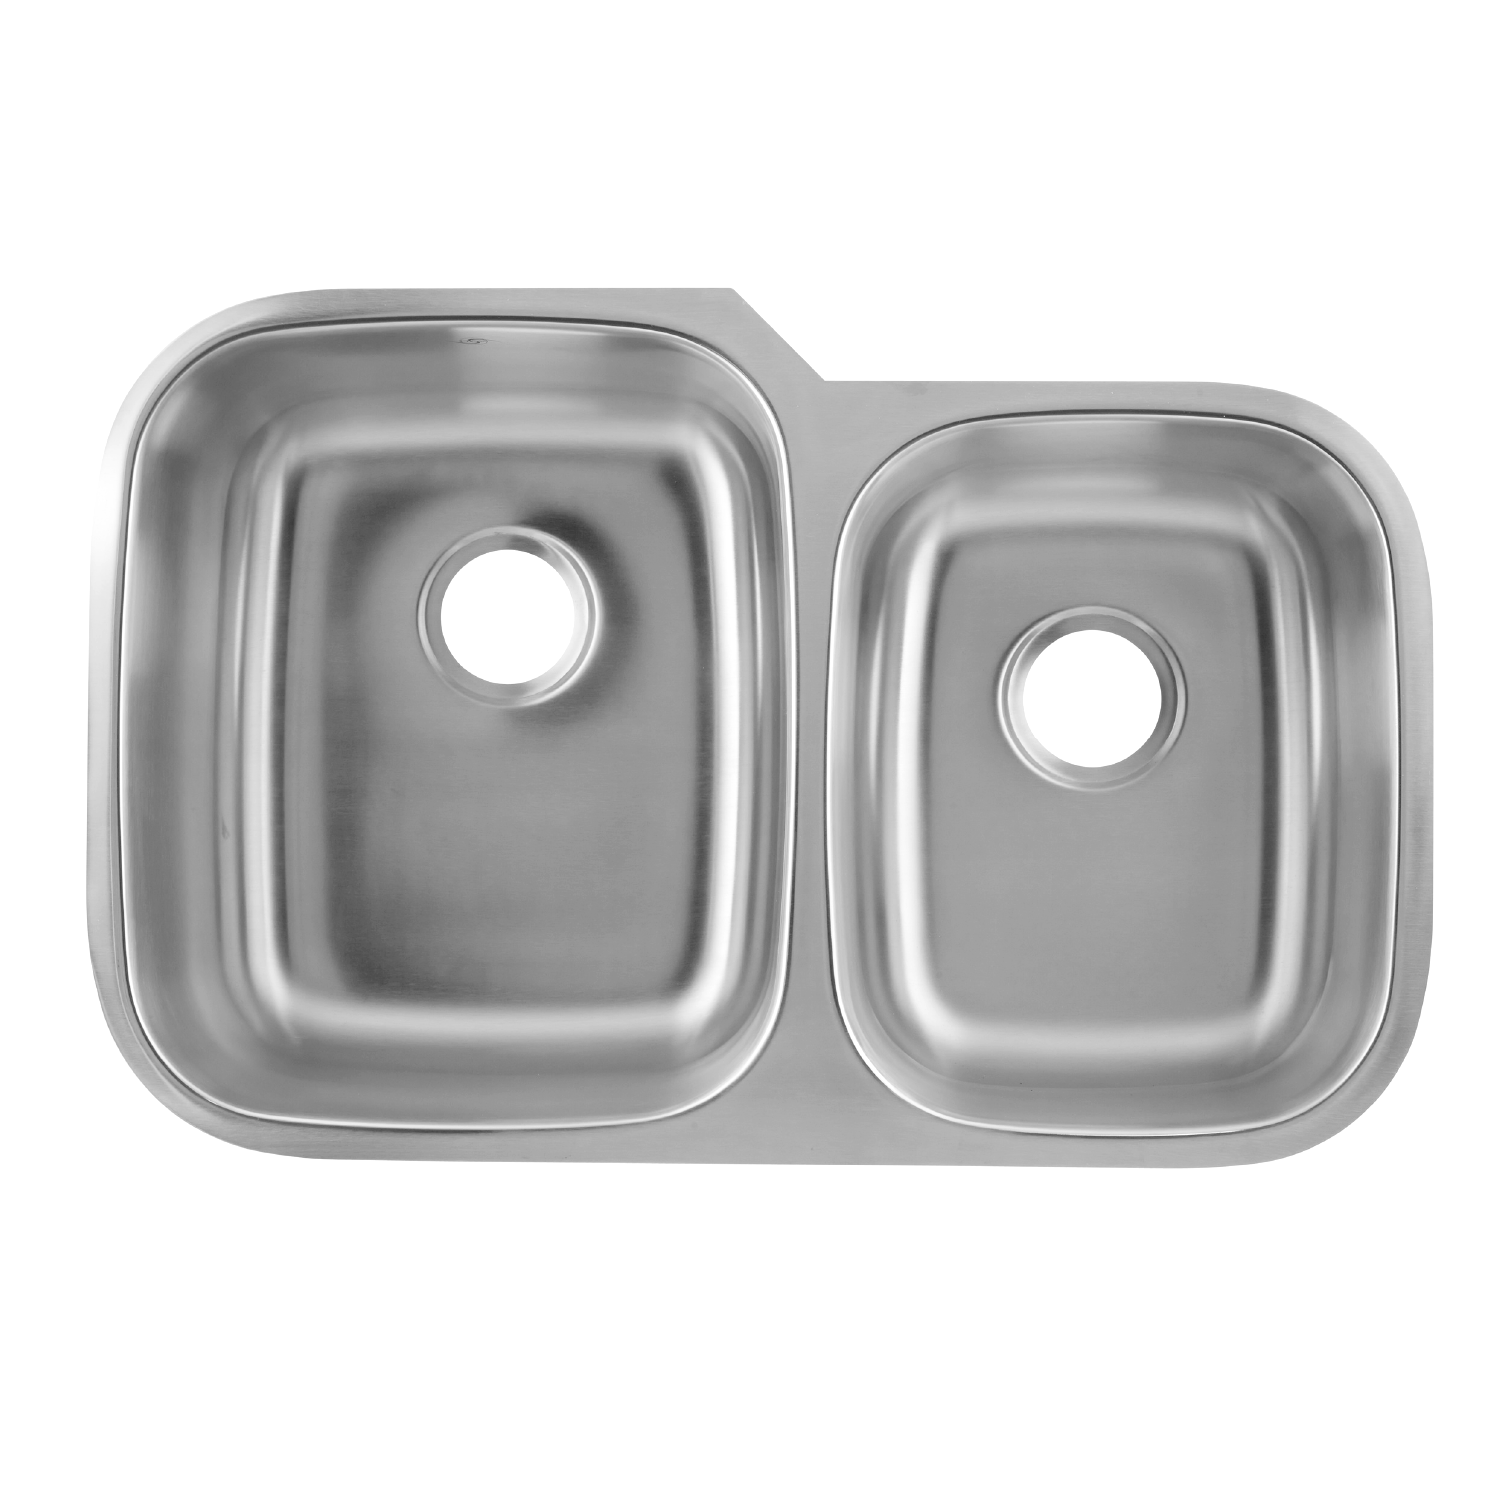 DAX 60/40 Double Bowl Undermount Kitchen Sink, 18 Gauge, Stainless Steel, Brushed Finish , 32 x 20-3/4 x 9 Inches (KA-3120L)